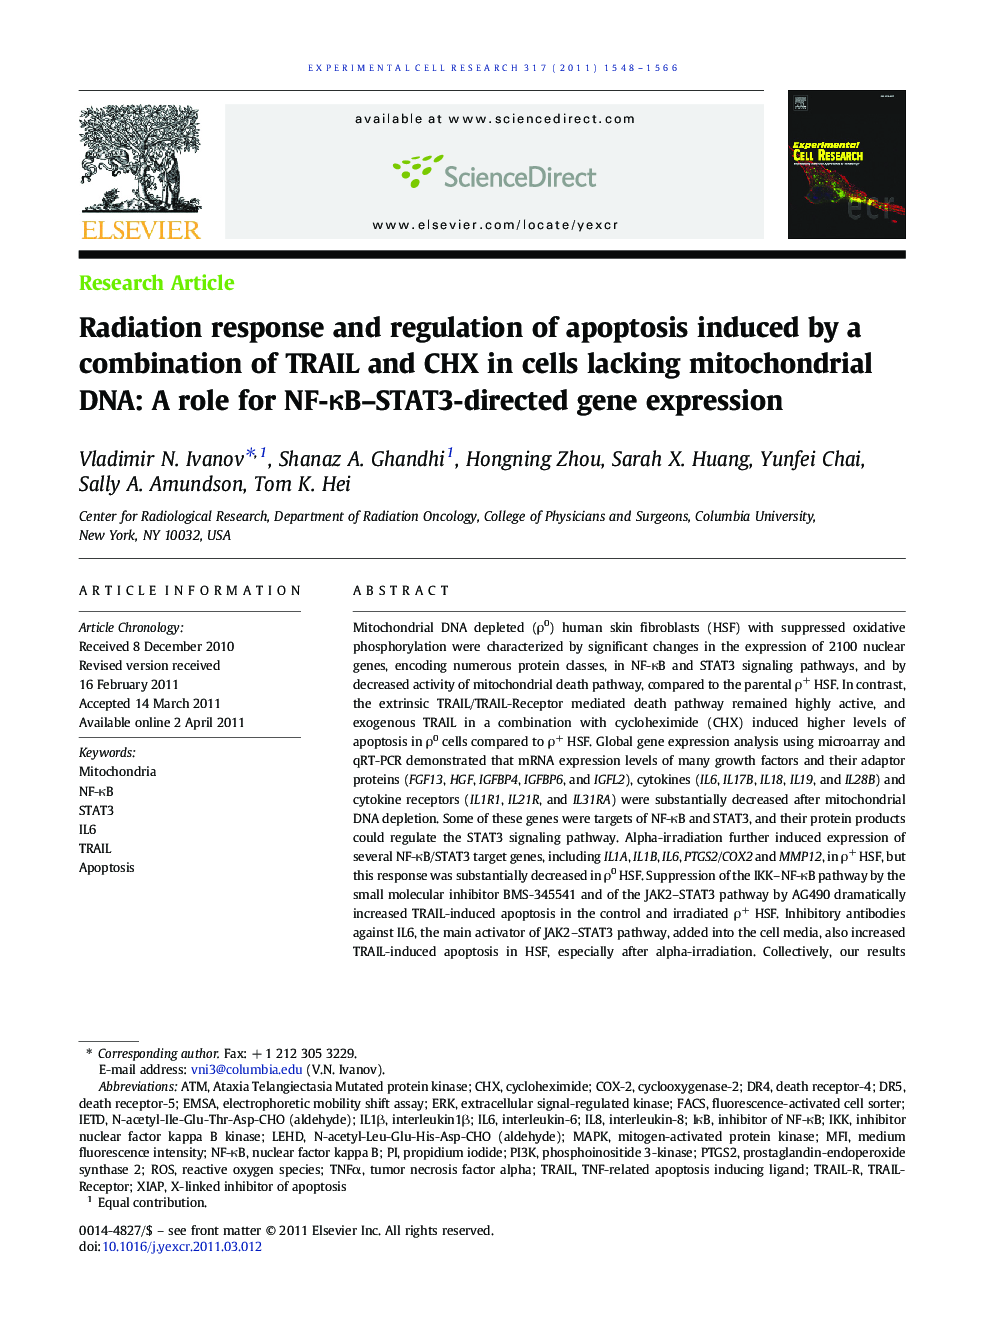 Radiation response and regulation of apoptosis induced by a combination of TRAIL and CHX in cells lacking mitochondrial DNA: A role for NF-κB–STAT3-directed gene expression